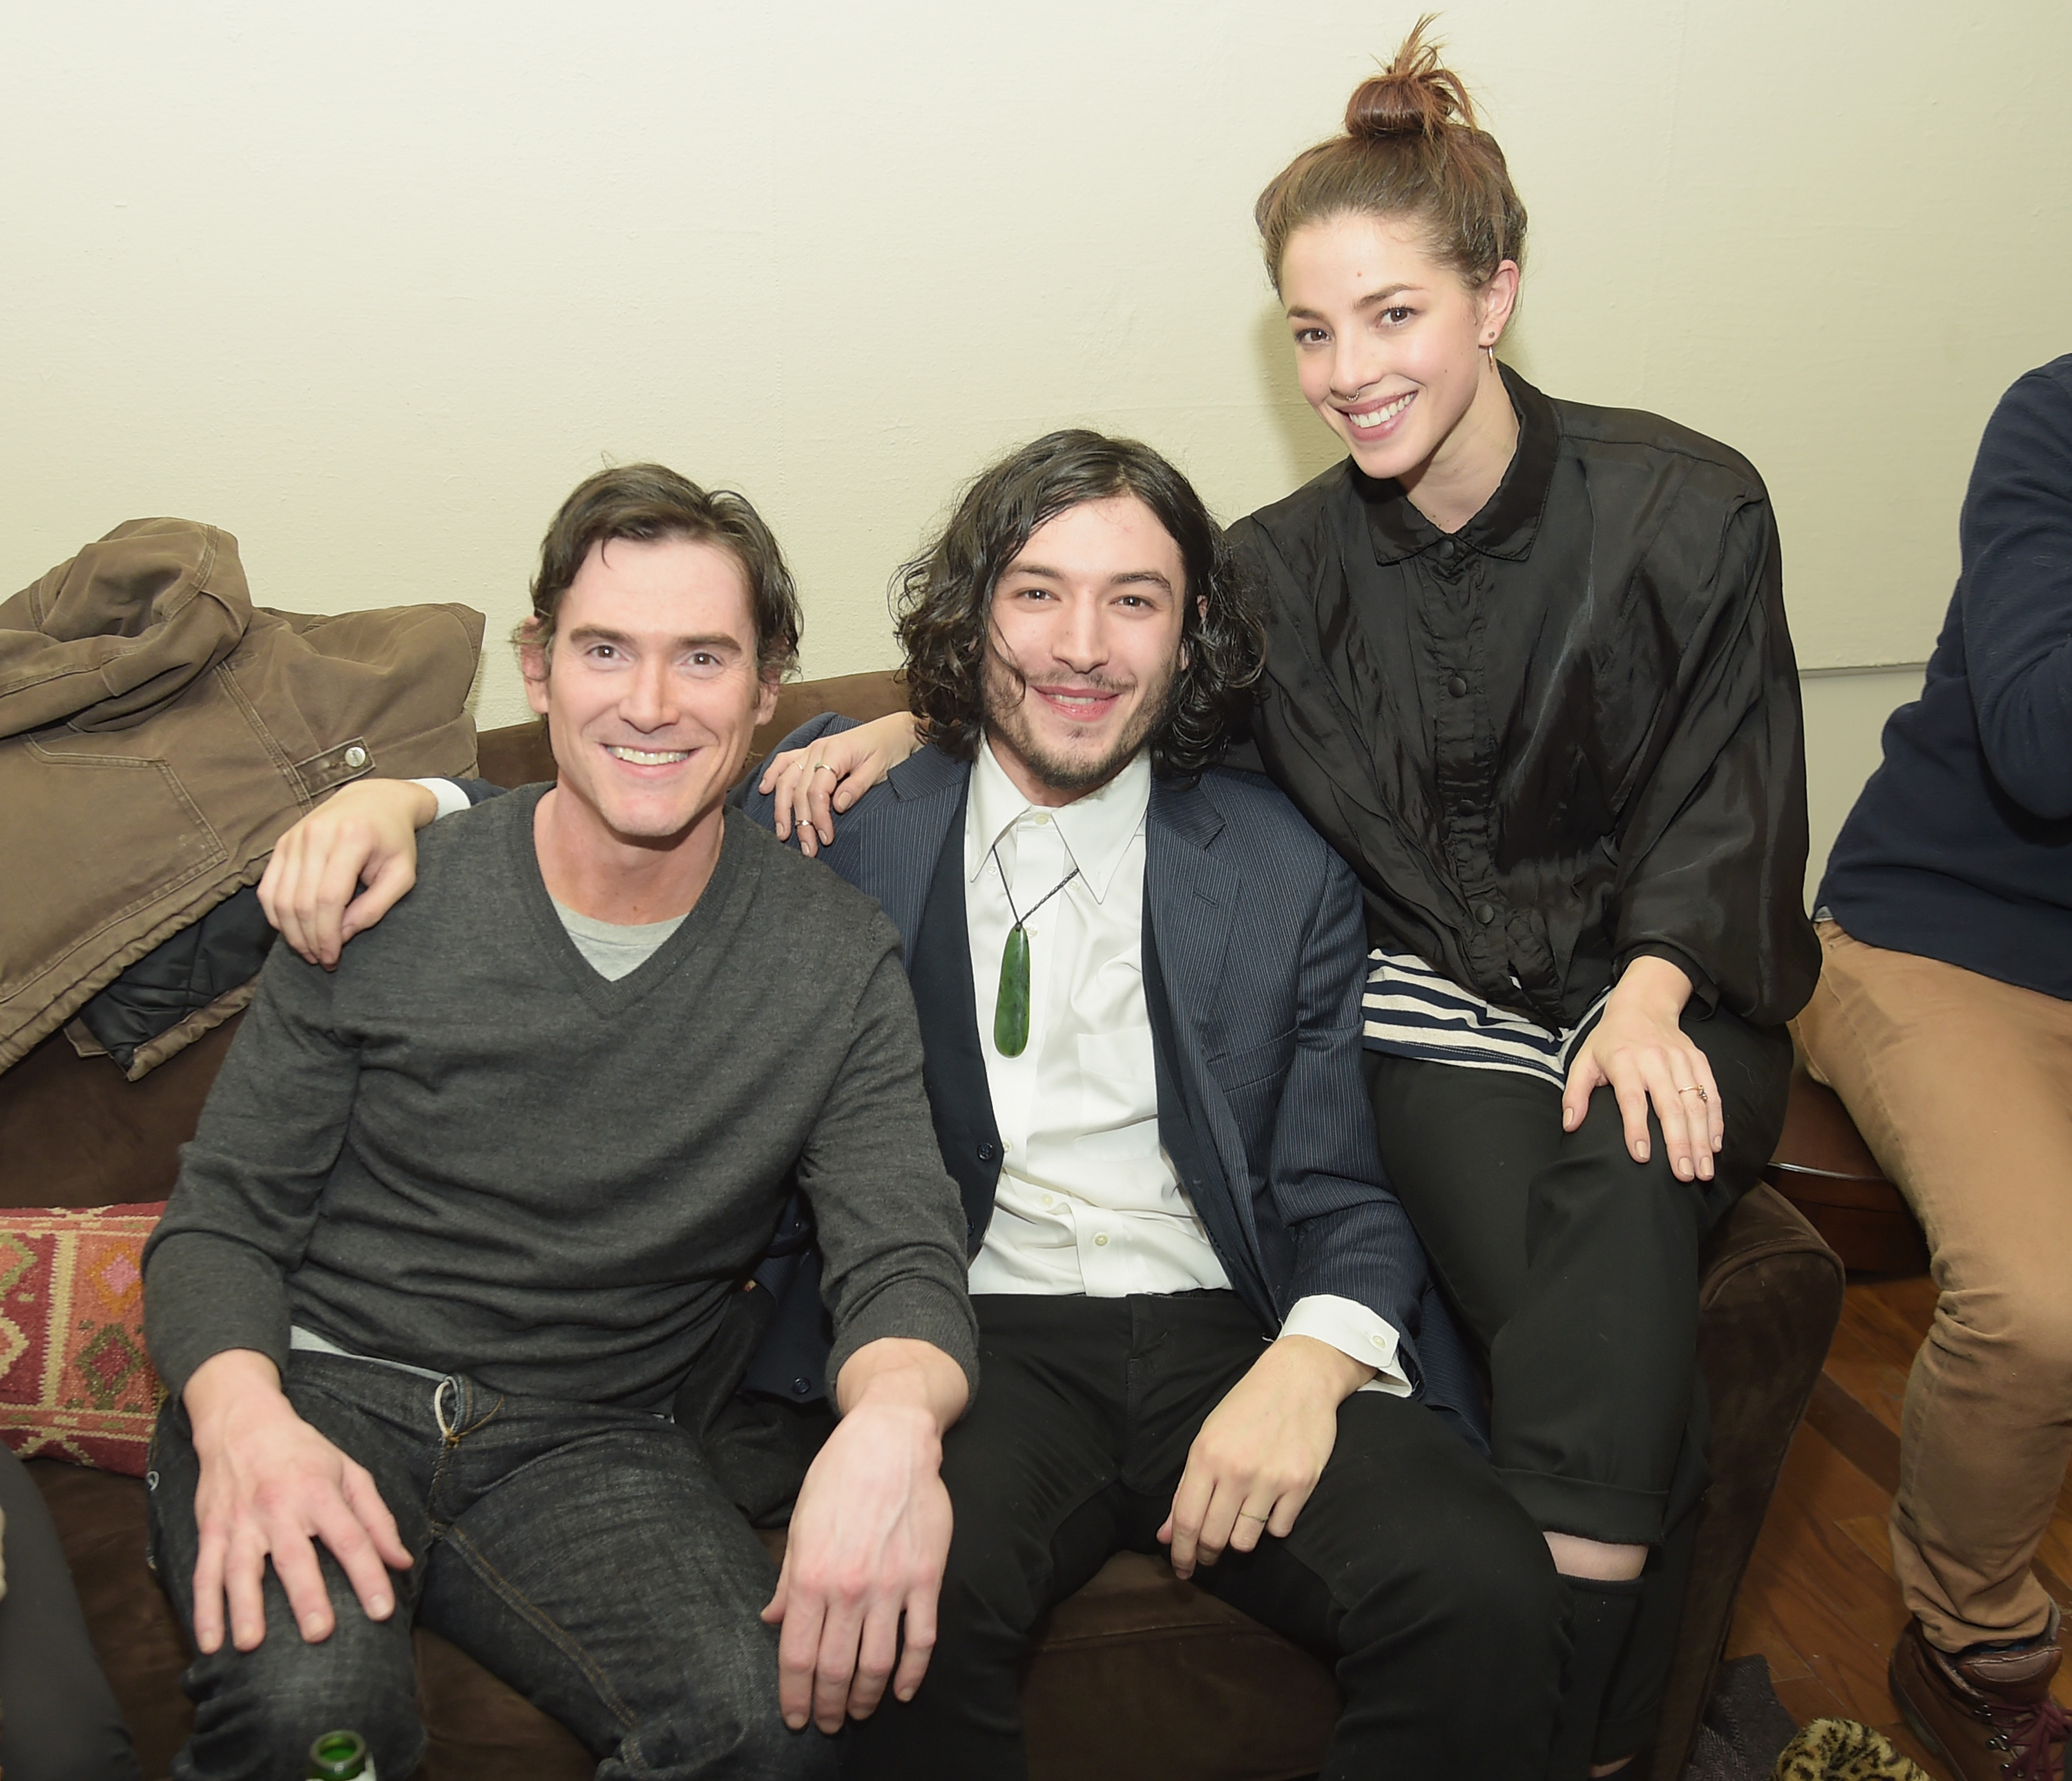 Actors Billy Crudup, Ezra Miller and Olivia Thirlby - GREY GOOSE Blue Door Hosts "The Stanford Prison Experiment" Party At Sundance - 2015 Park City